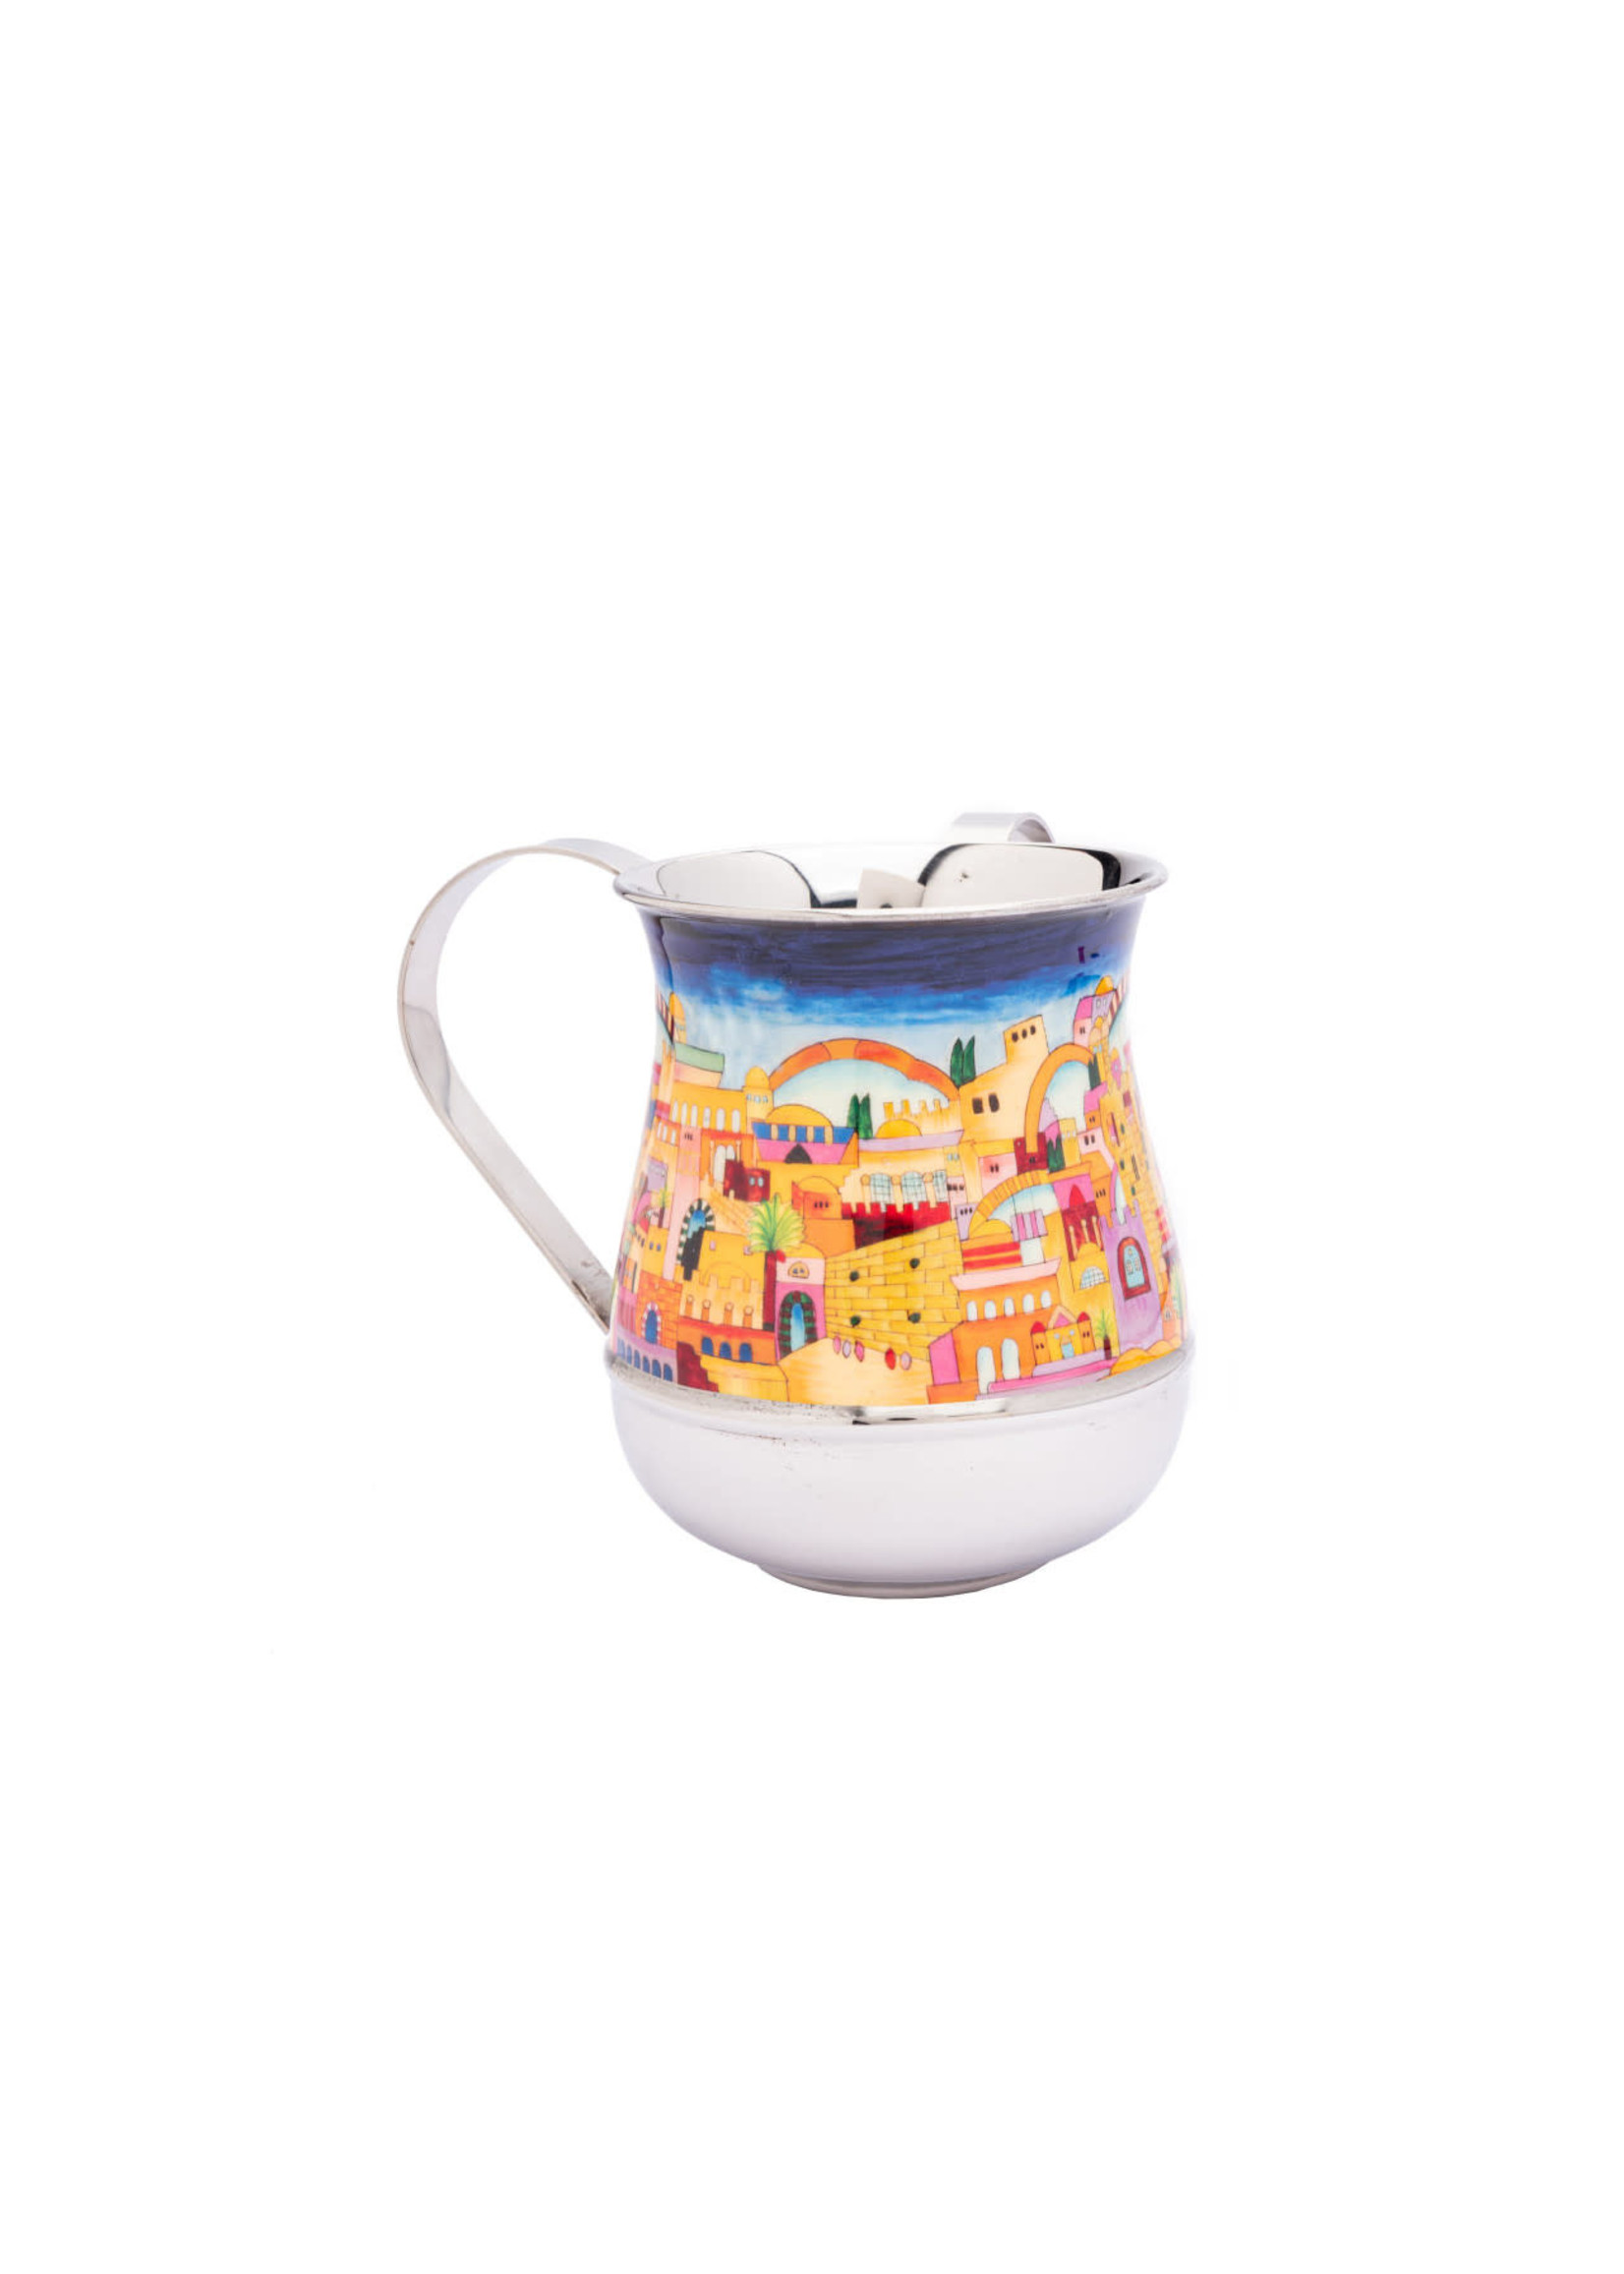 WASHING CUP WITH JERUSALEM PAINTING